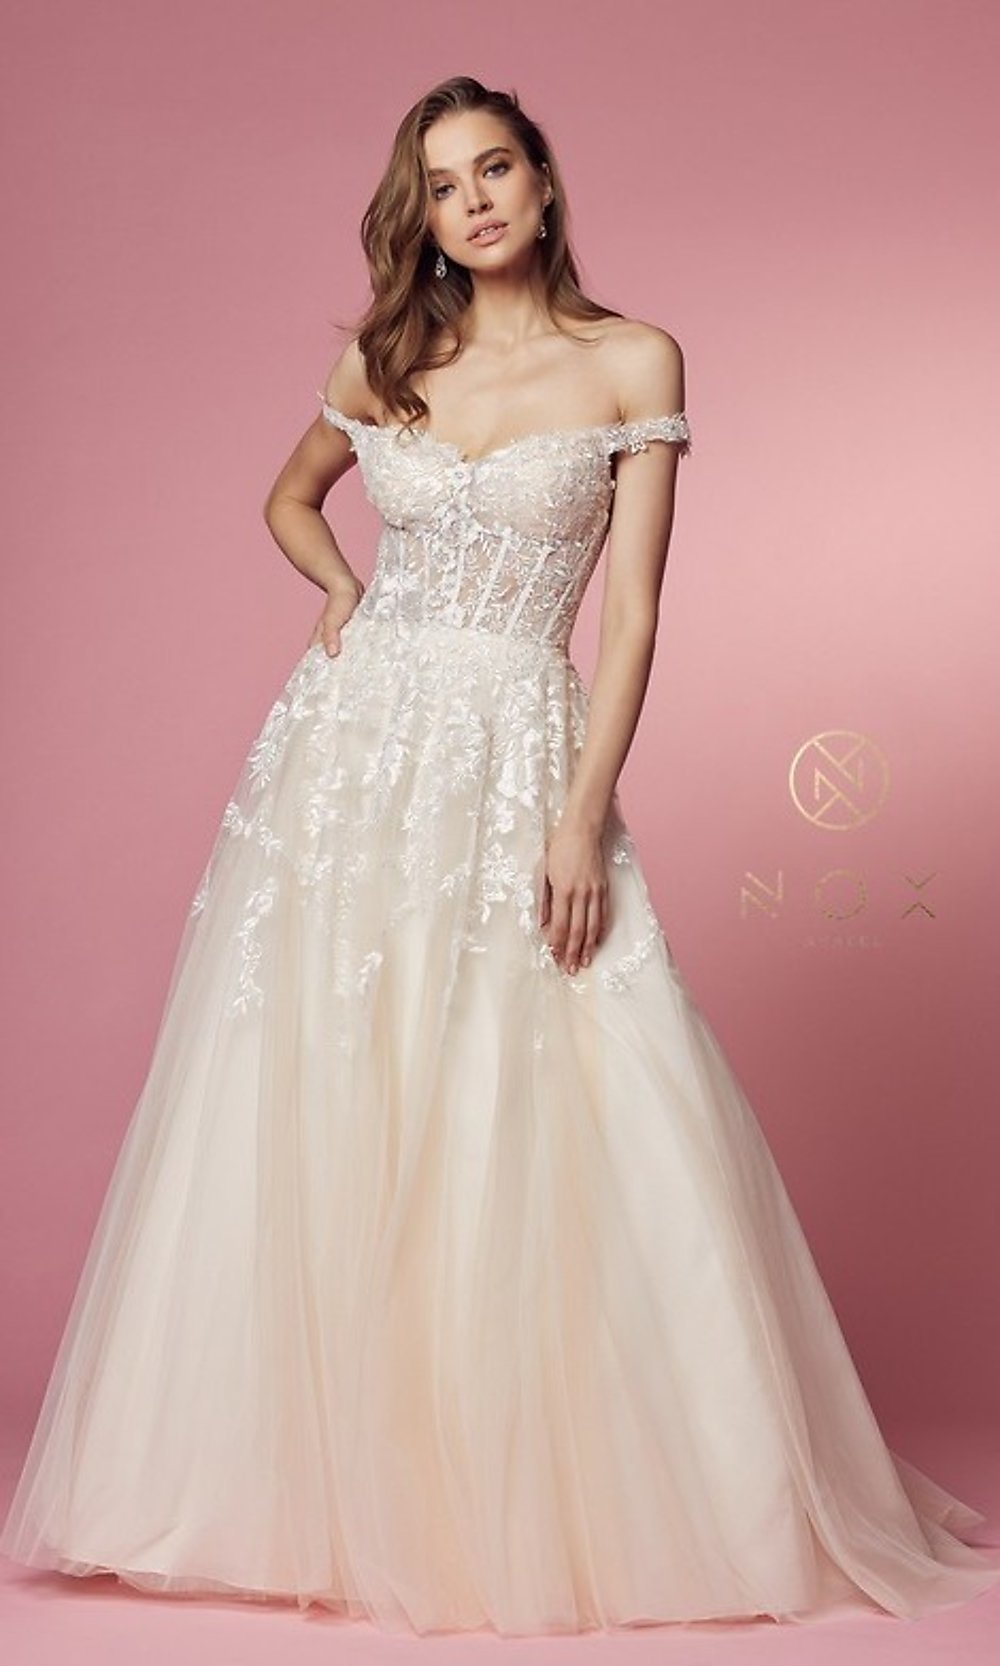 Sheer-Corset Long White Off-the-Shoulder Ball Gown